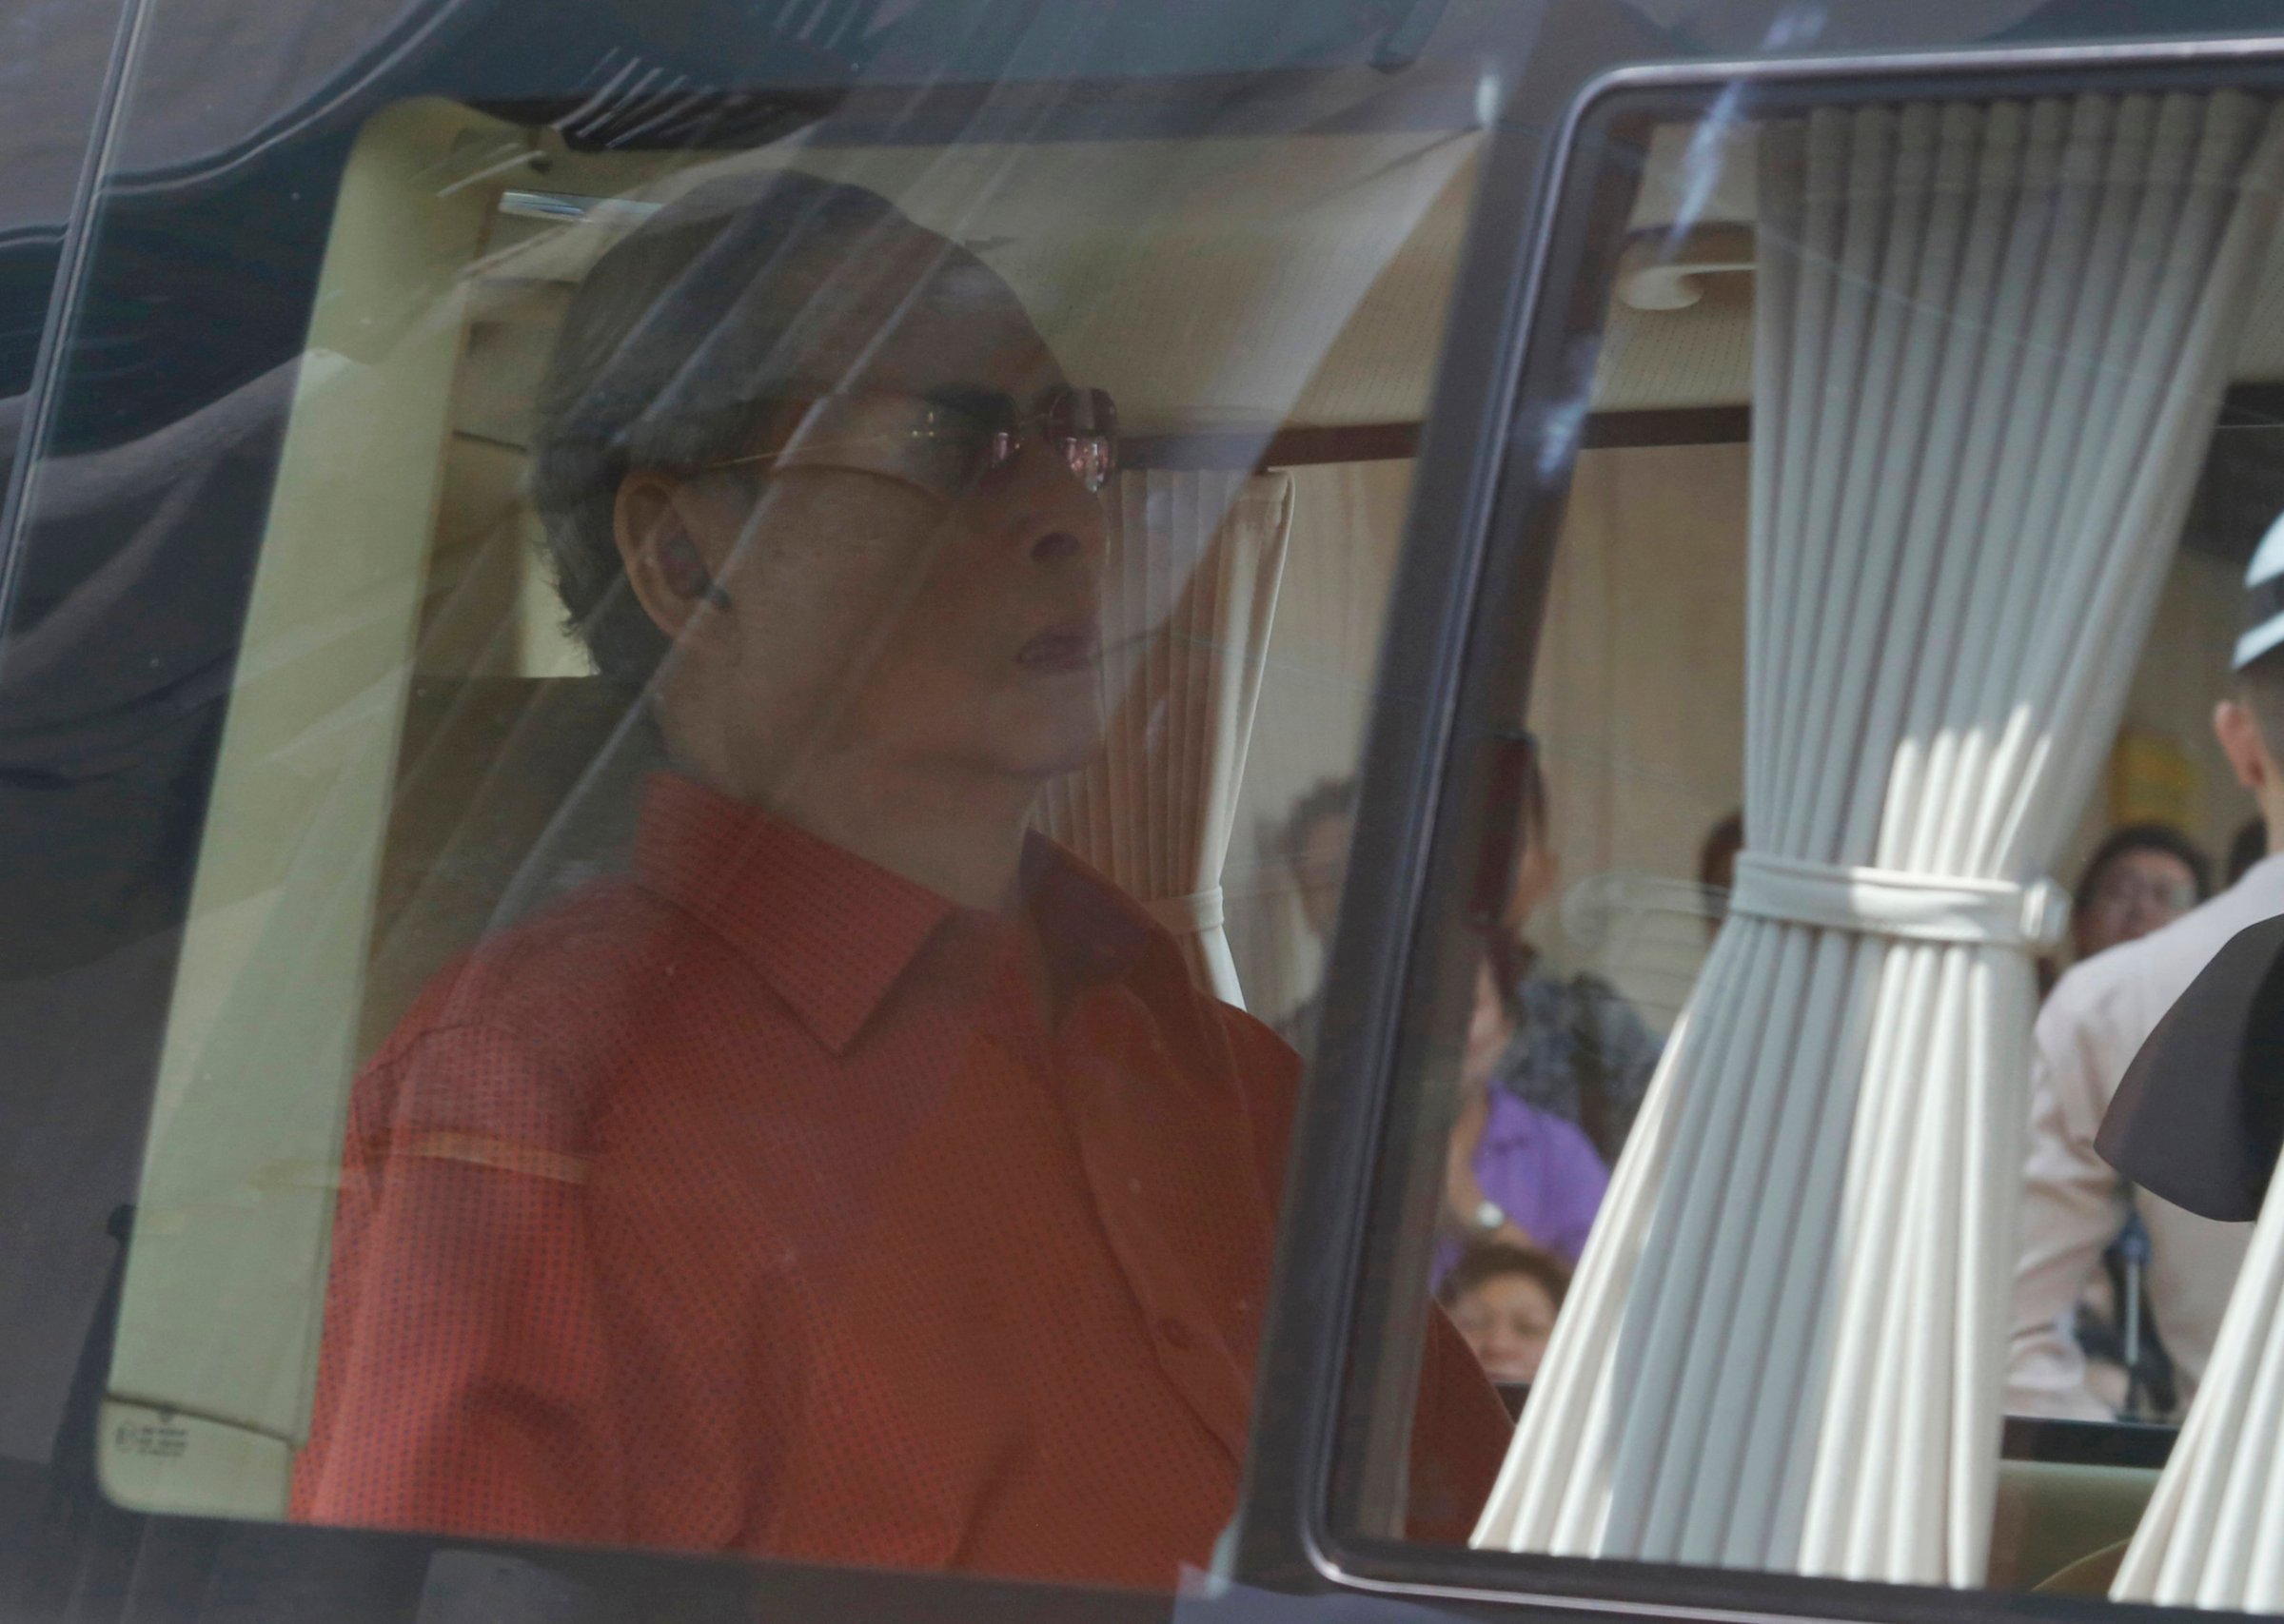 Thai King Bhumibol Adulyadej leaves Siriraj Hospital in Bangkok, on May 10, 2015 to return to his seaside palace after being hospitalized since Oct. 2014 when he had his gallbladder removed.